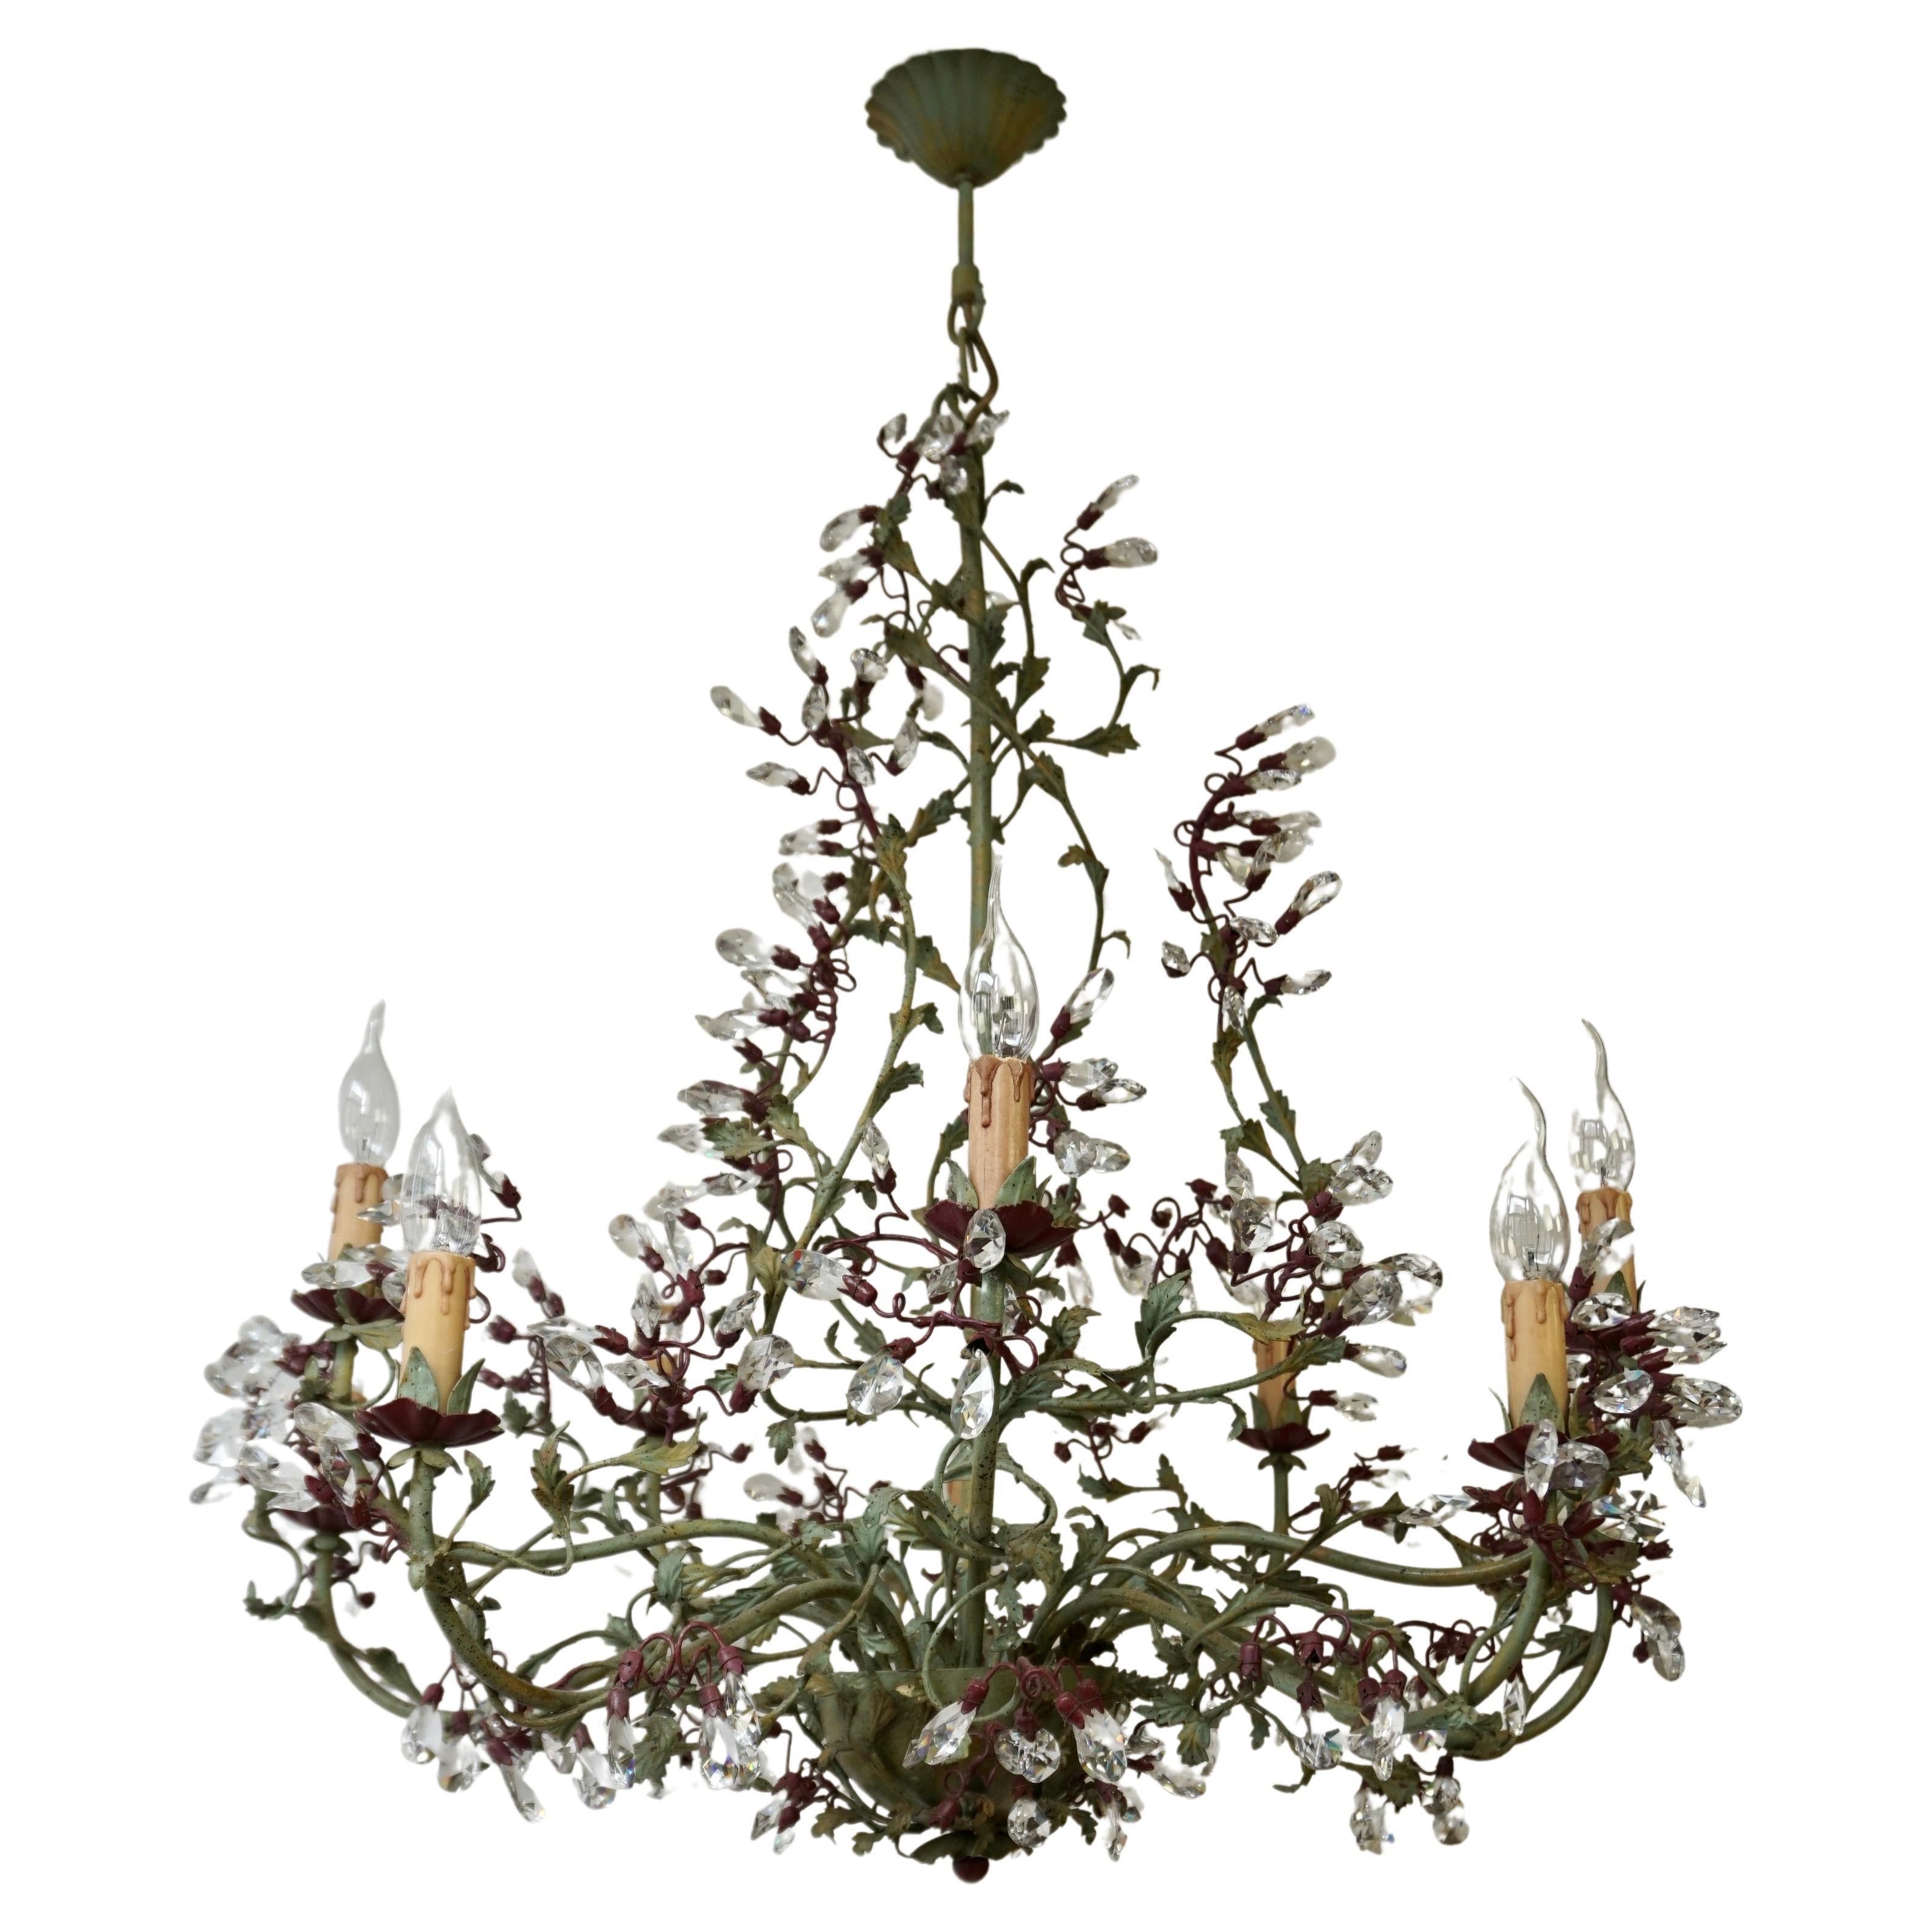 Very elegant contemporary Italian 10 arm large chandelier having green and bordeaux red painted metal body and arms decorated with clear crystal glass . 
By Sergio Mechini.

The lamp has ten sockets for small incandescent lamps with screw base or